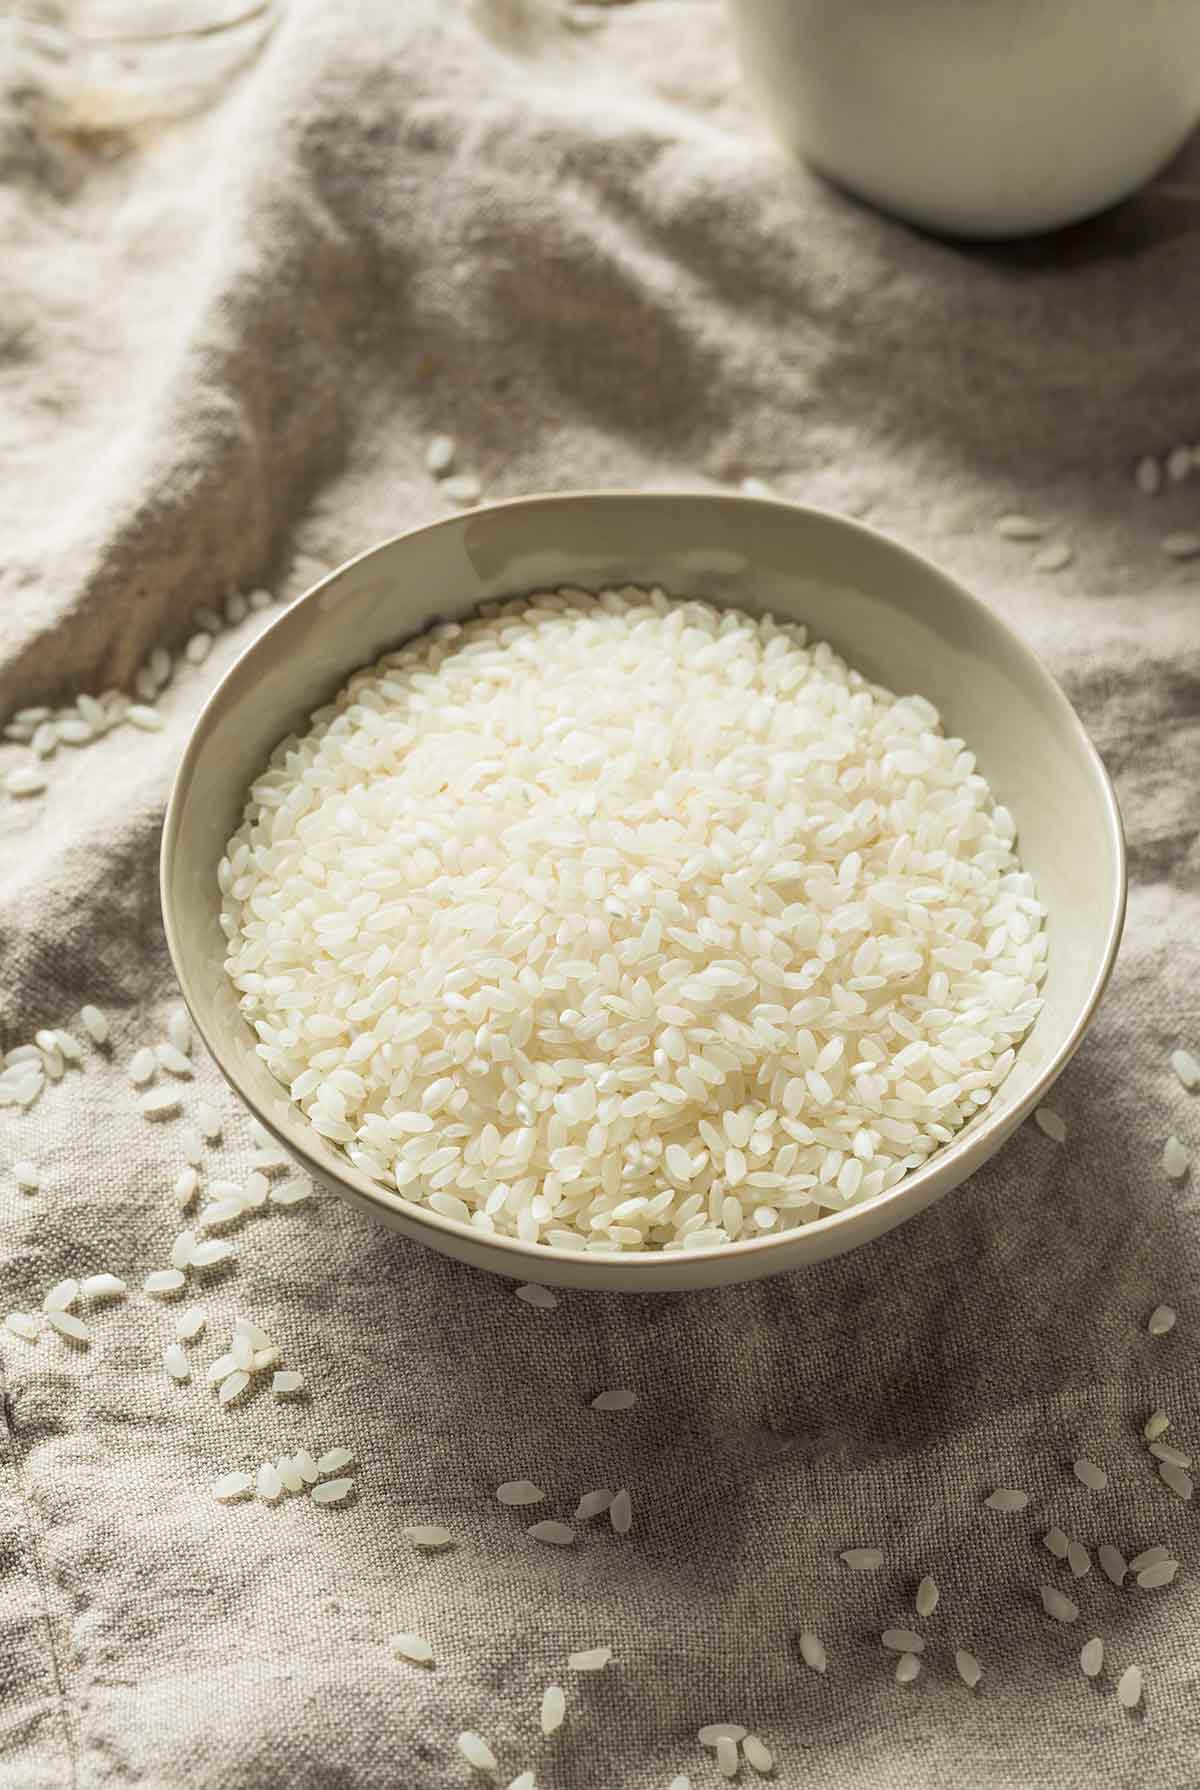 A bowl of white rice with rice grains scattered around it.